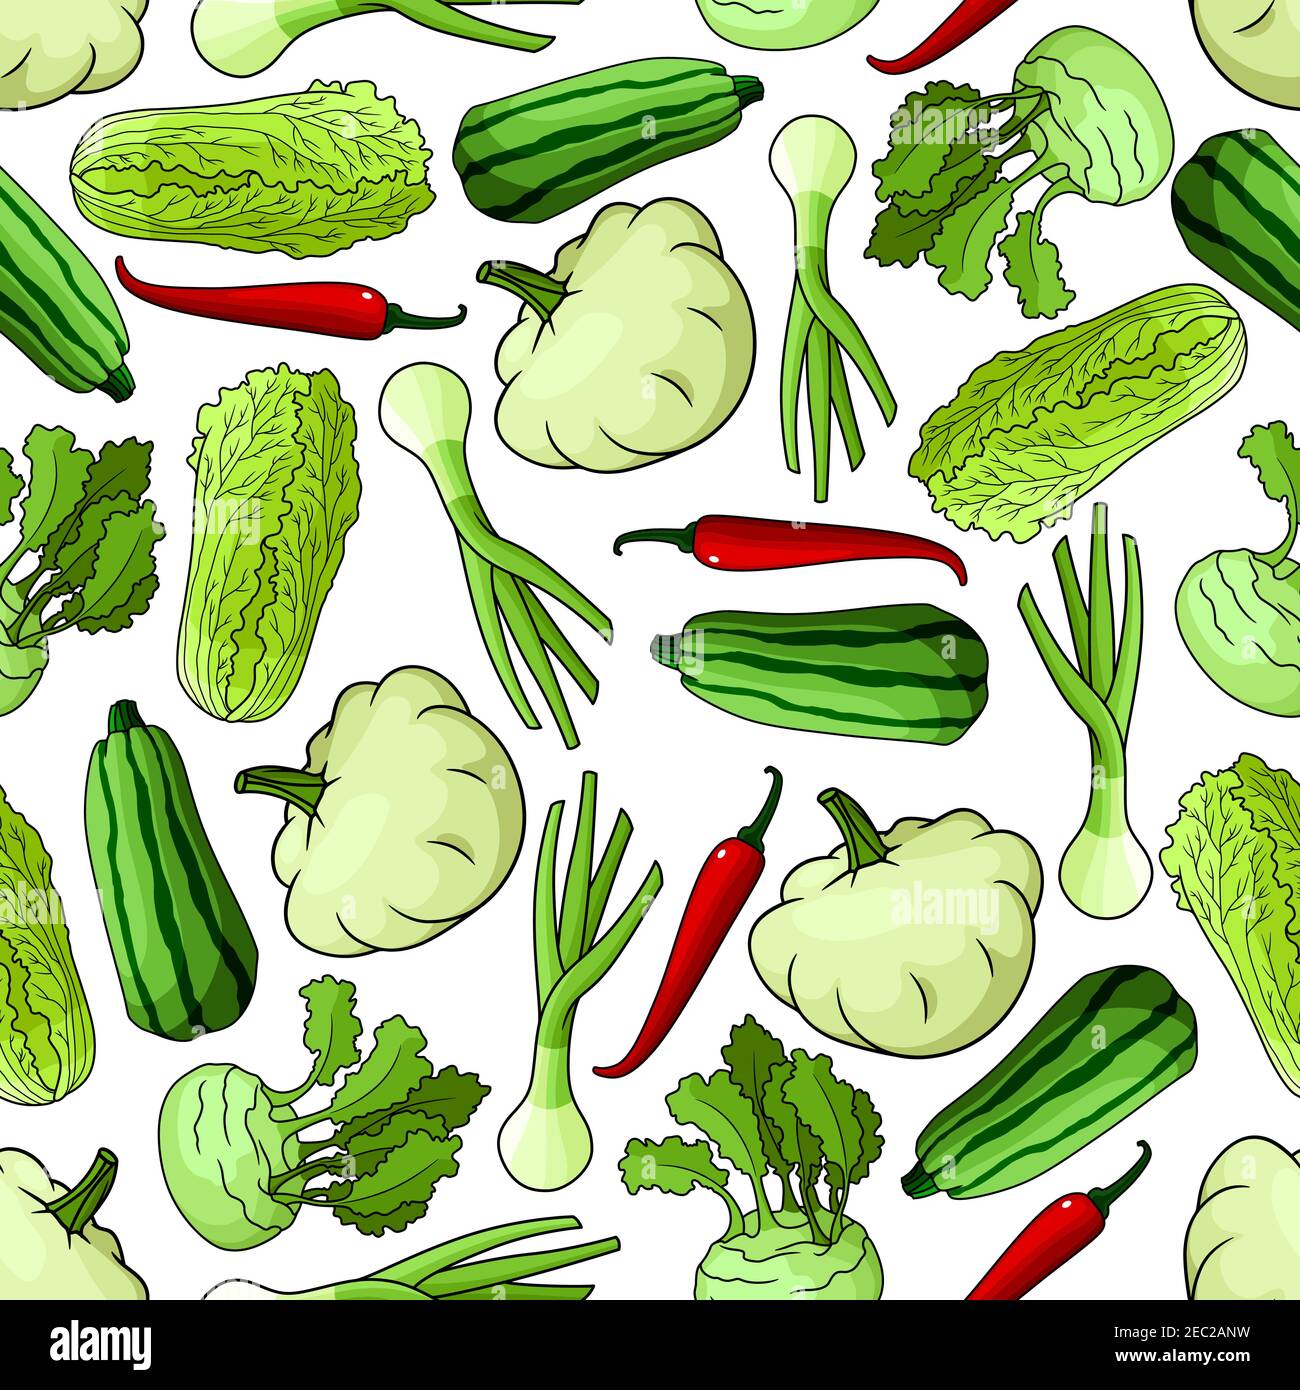 Bright spring vegetables seamless pattern with green onions, striped zucchini, chinese cabbages, red chilli peppers, kohlrabi and pattypan squashes ov Stock Vector